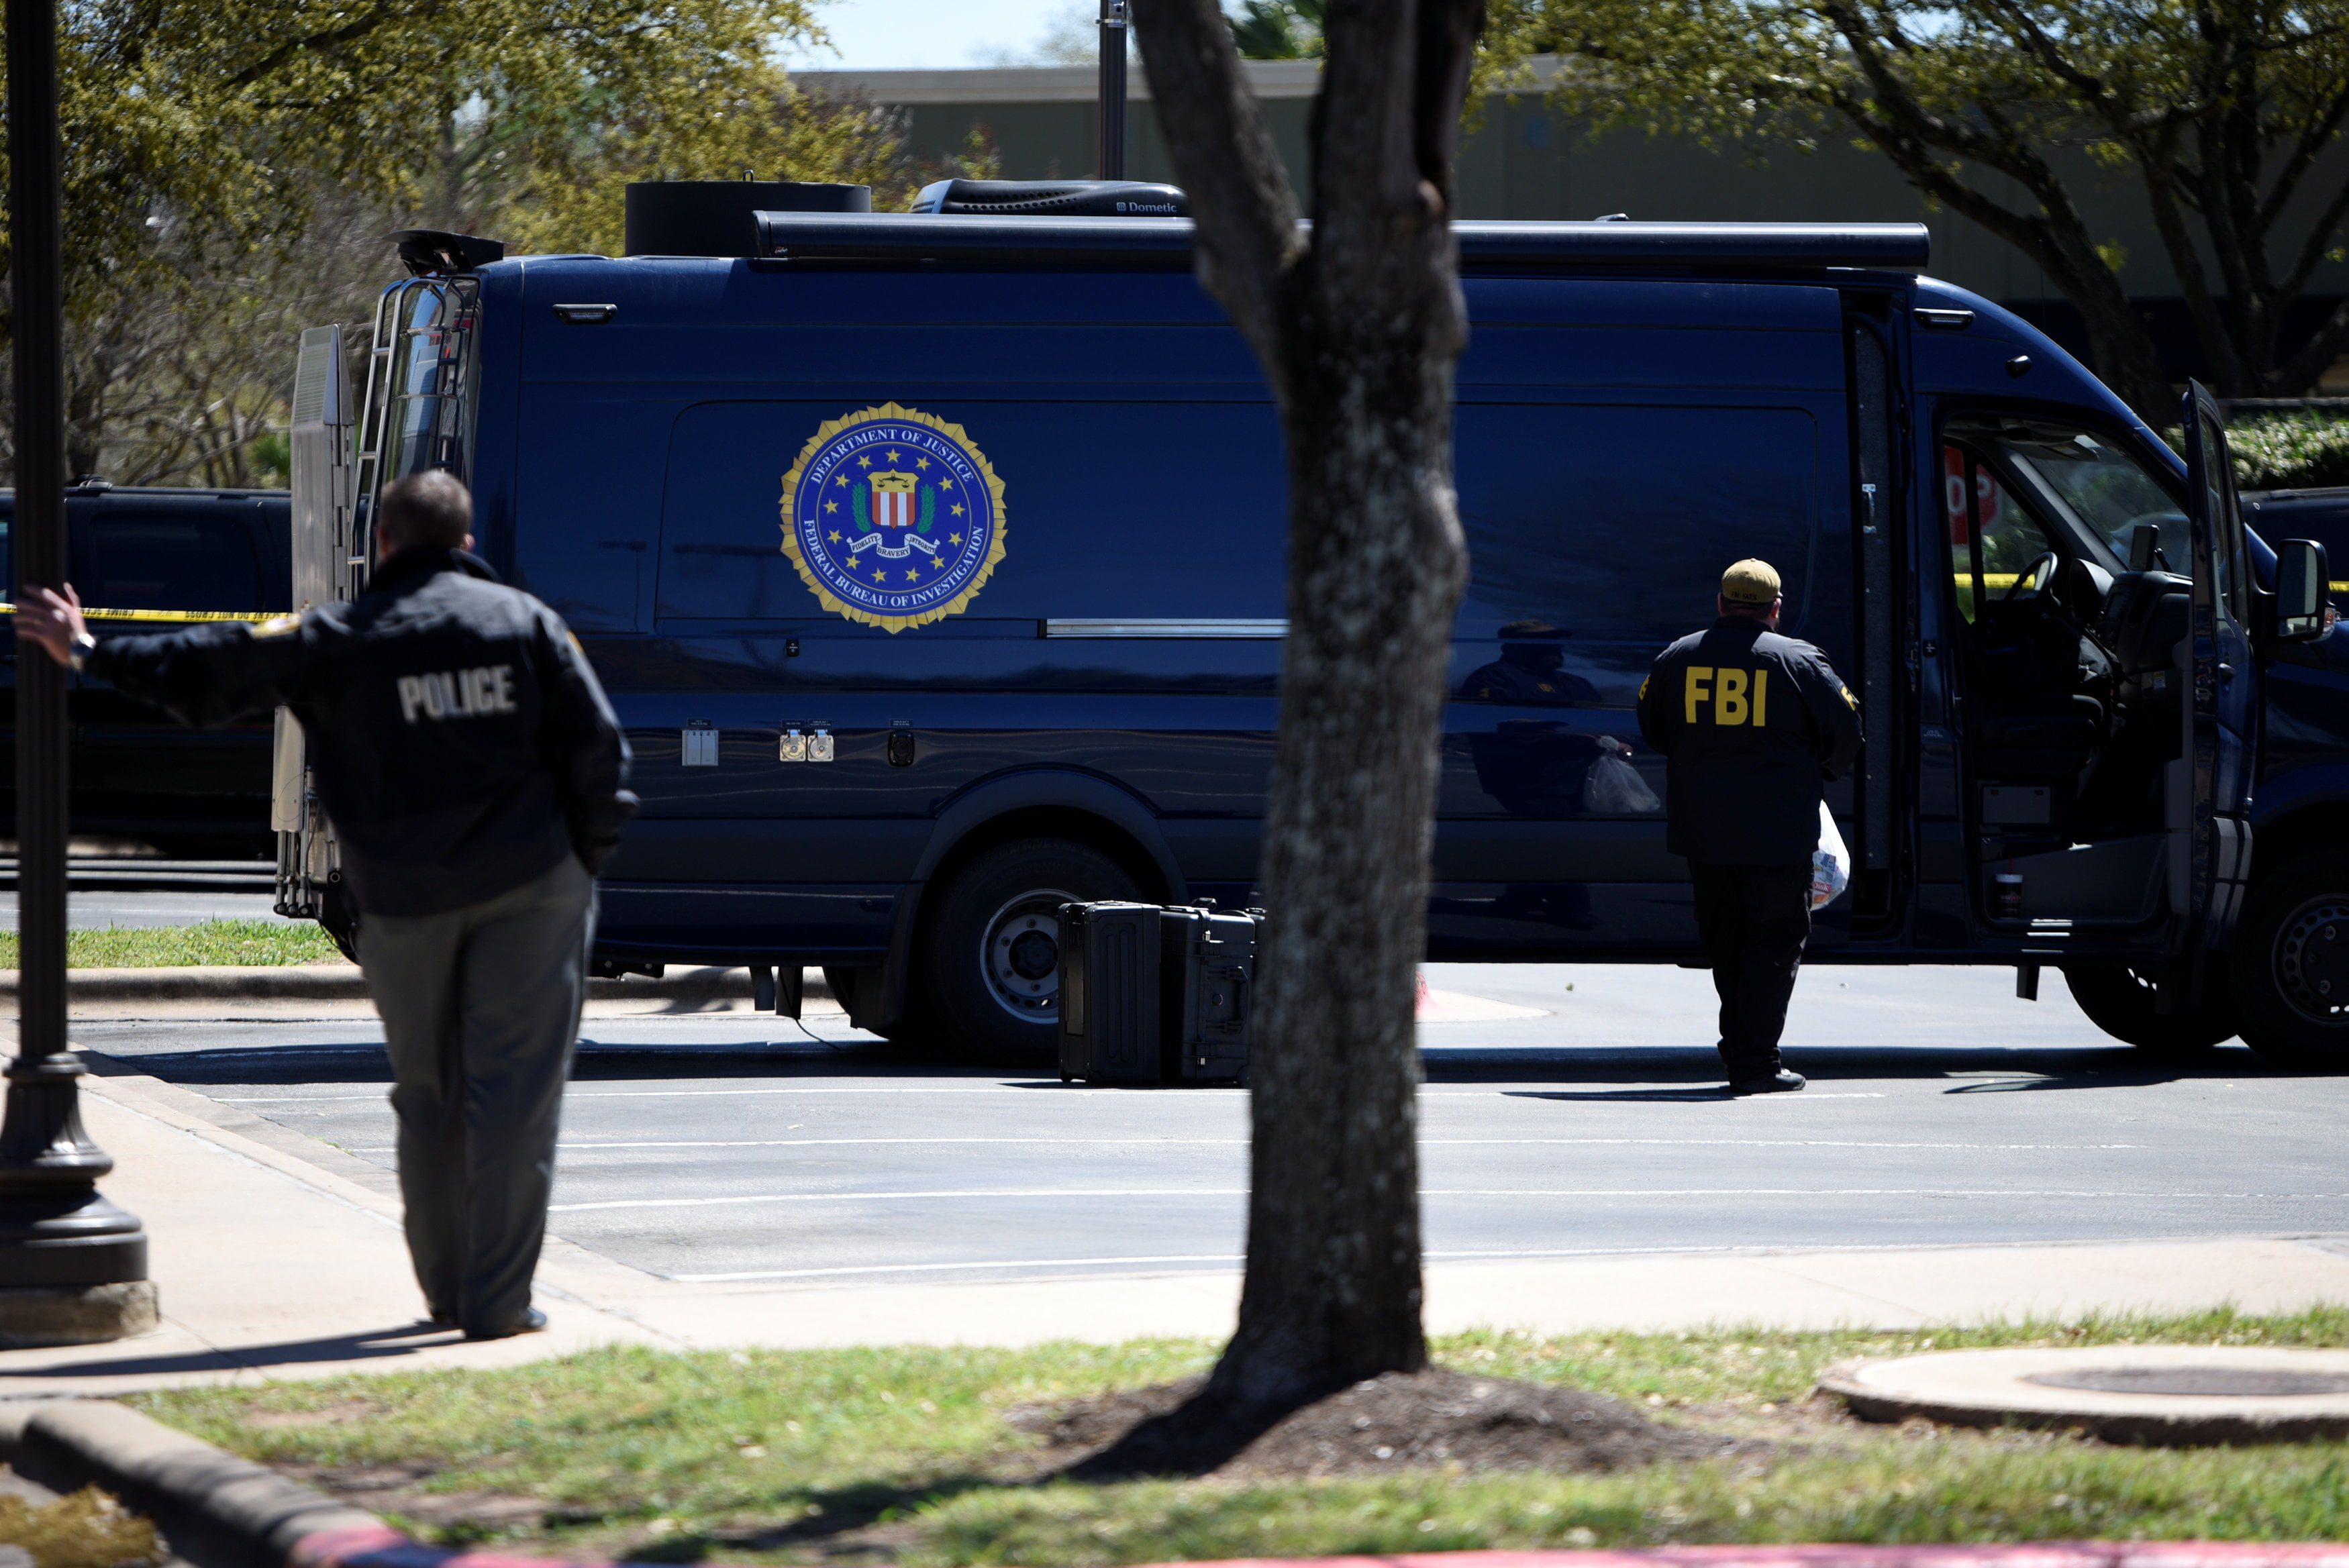 Law enforcement personnel are seen outside a FedEx Store which was closed for investigation, in Austin, Texas